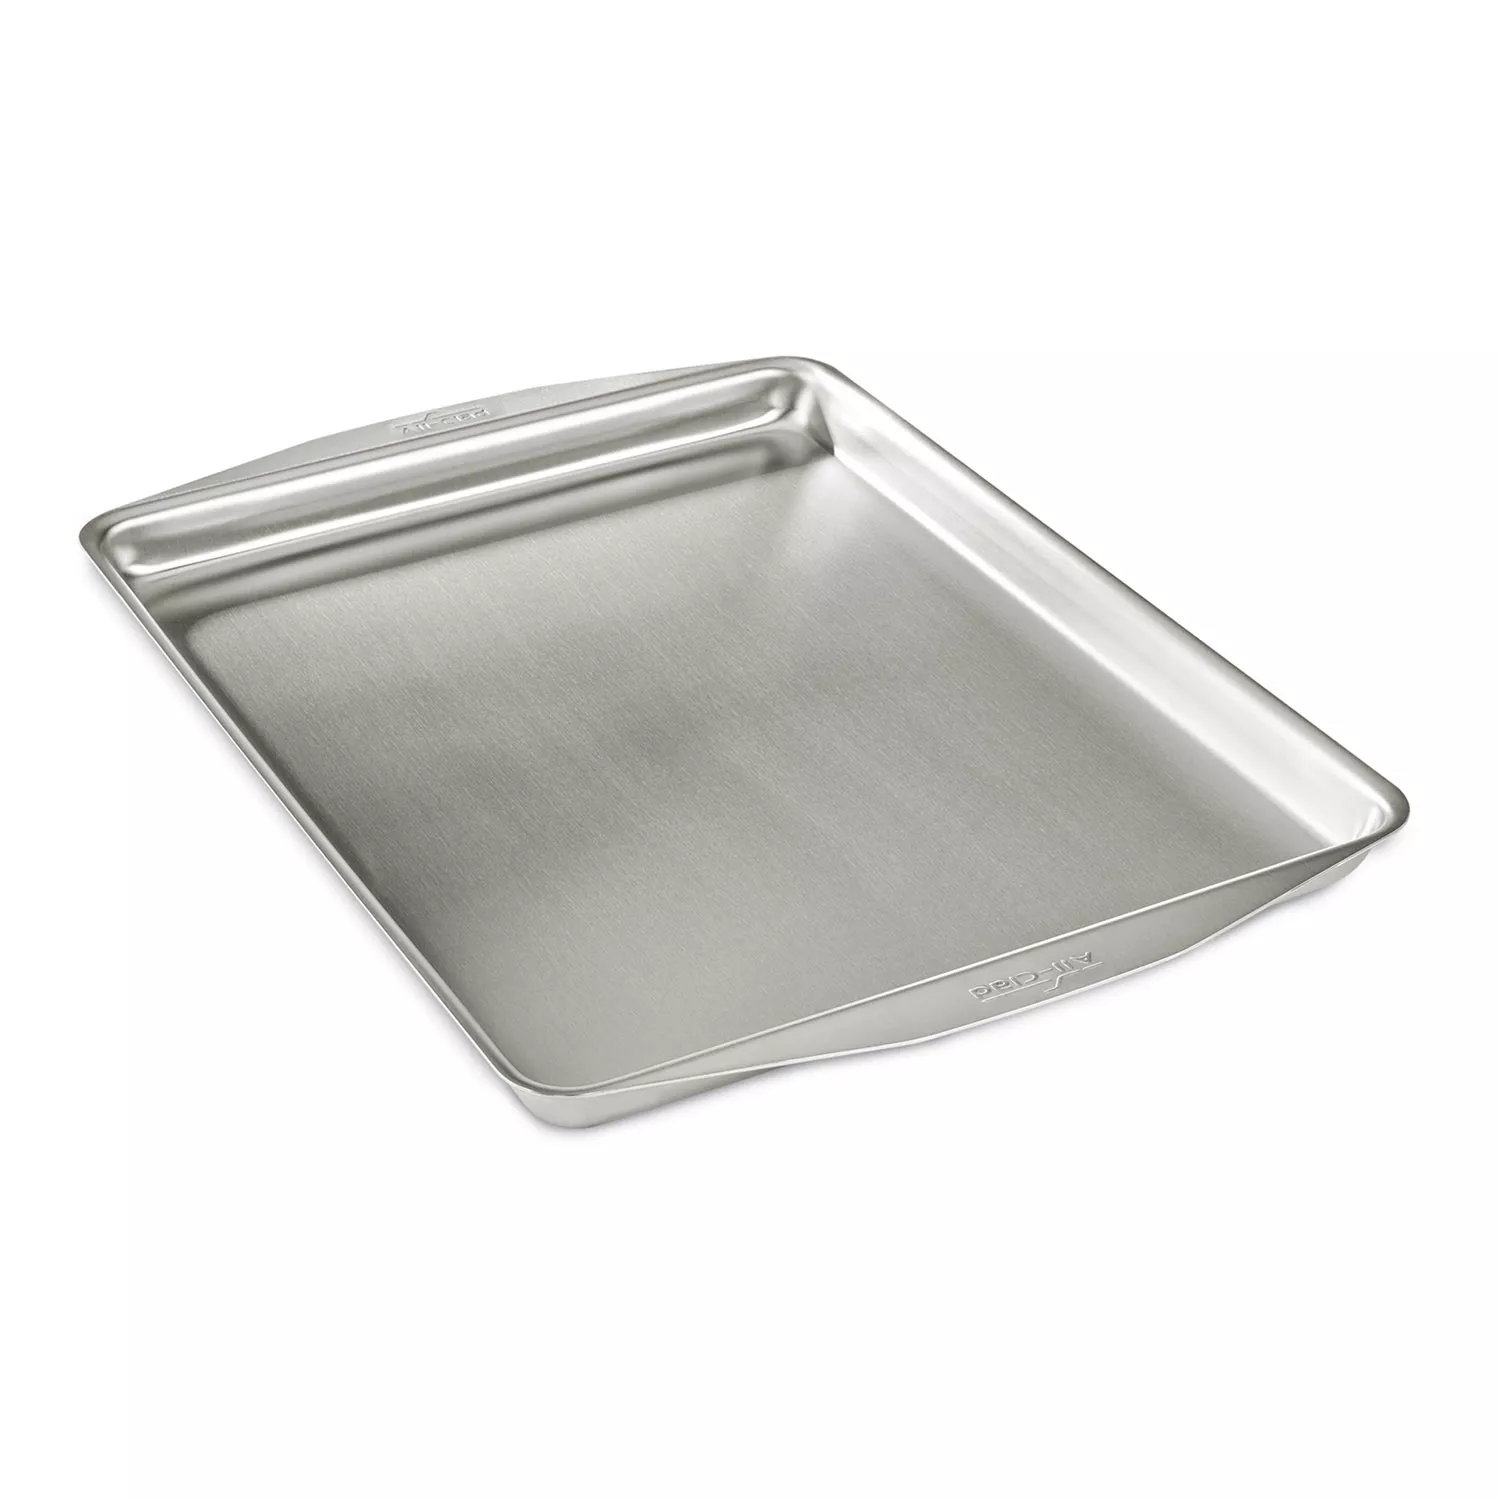  Calphalon Classic Bakeware Special Value 12-by-17-Inch  Rectangular Nonstick Jelly Roll Pans, Set of 2: Cookie Sheet: Home & Kitchen